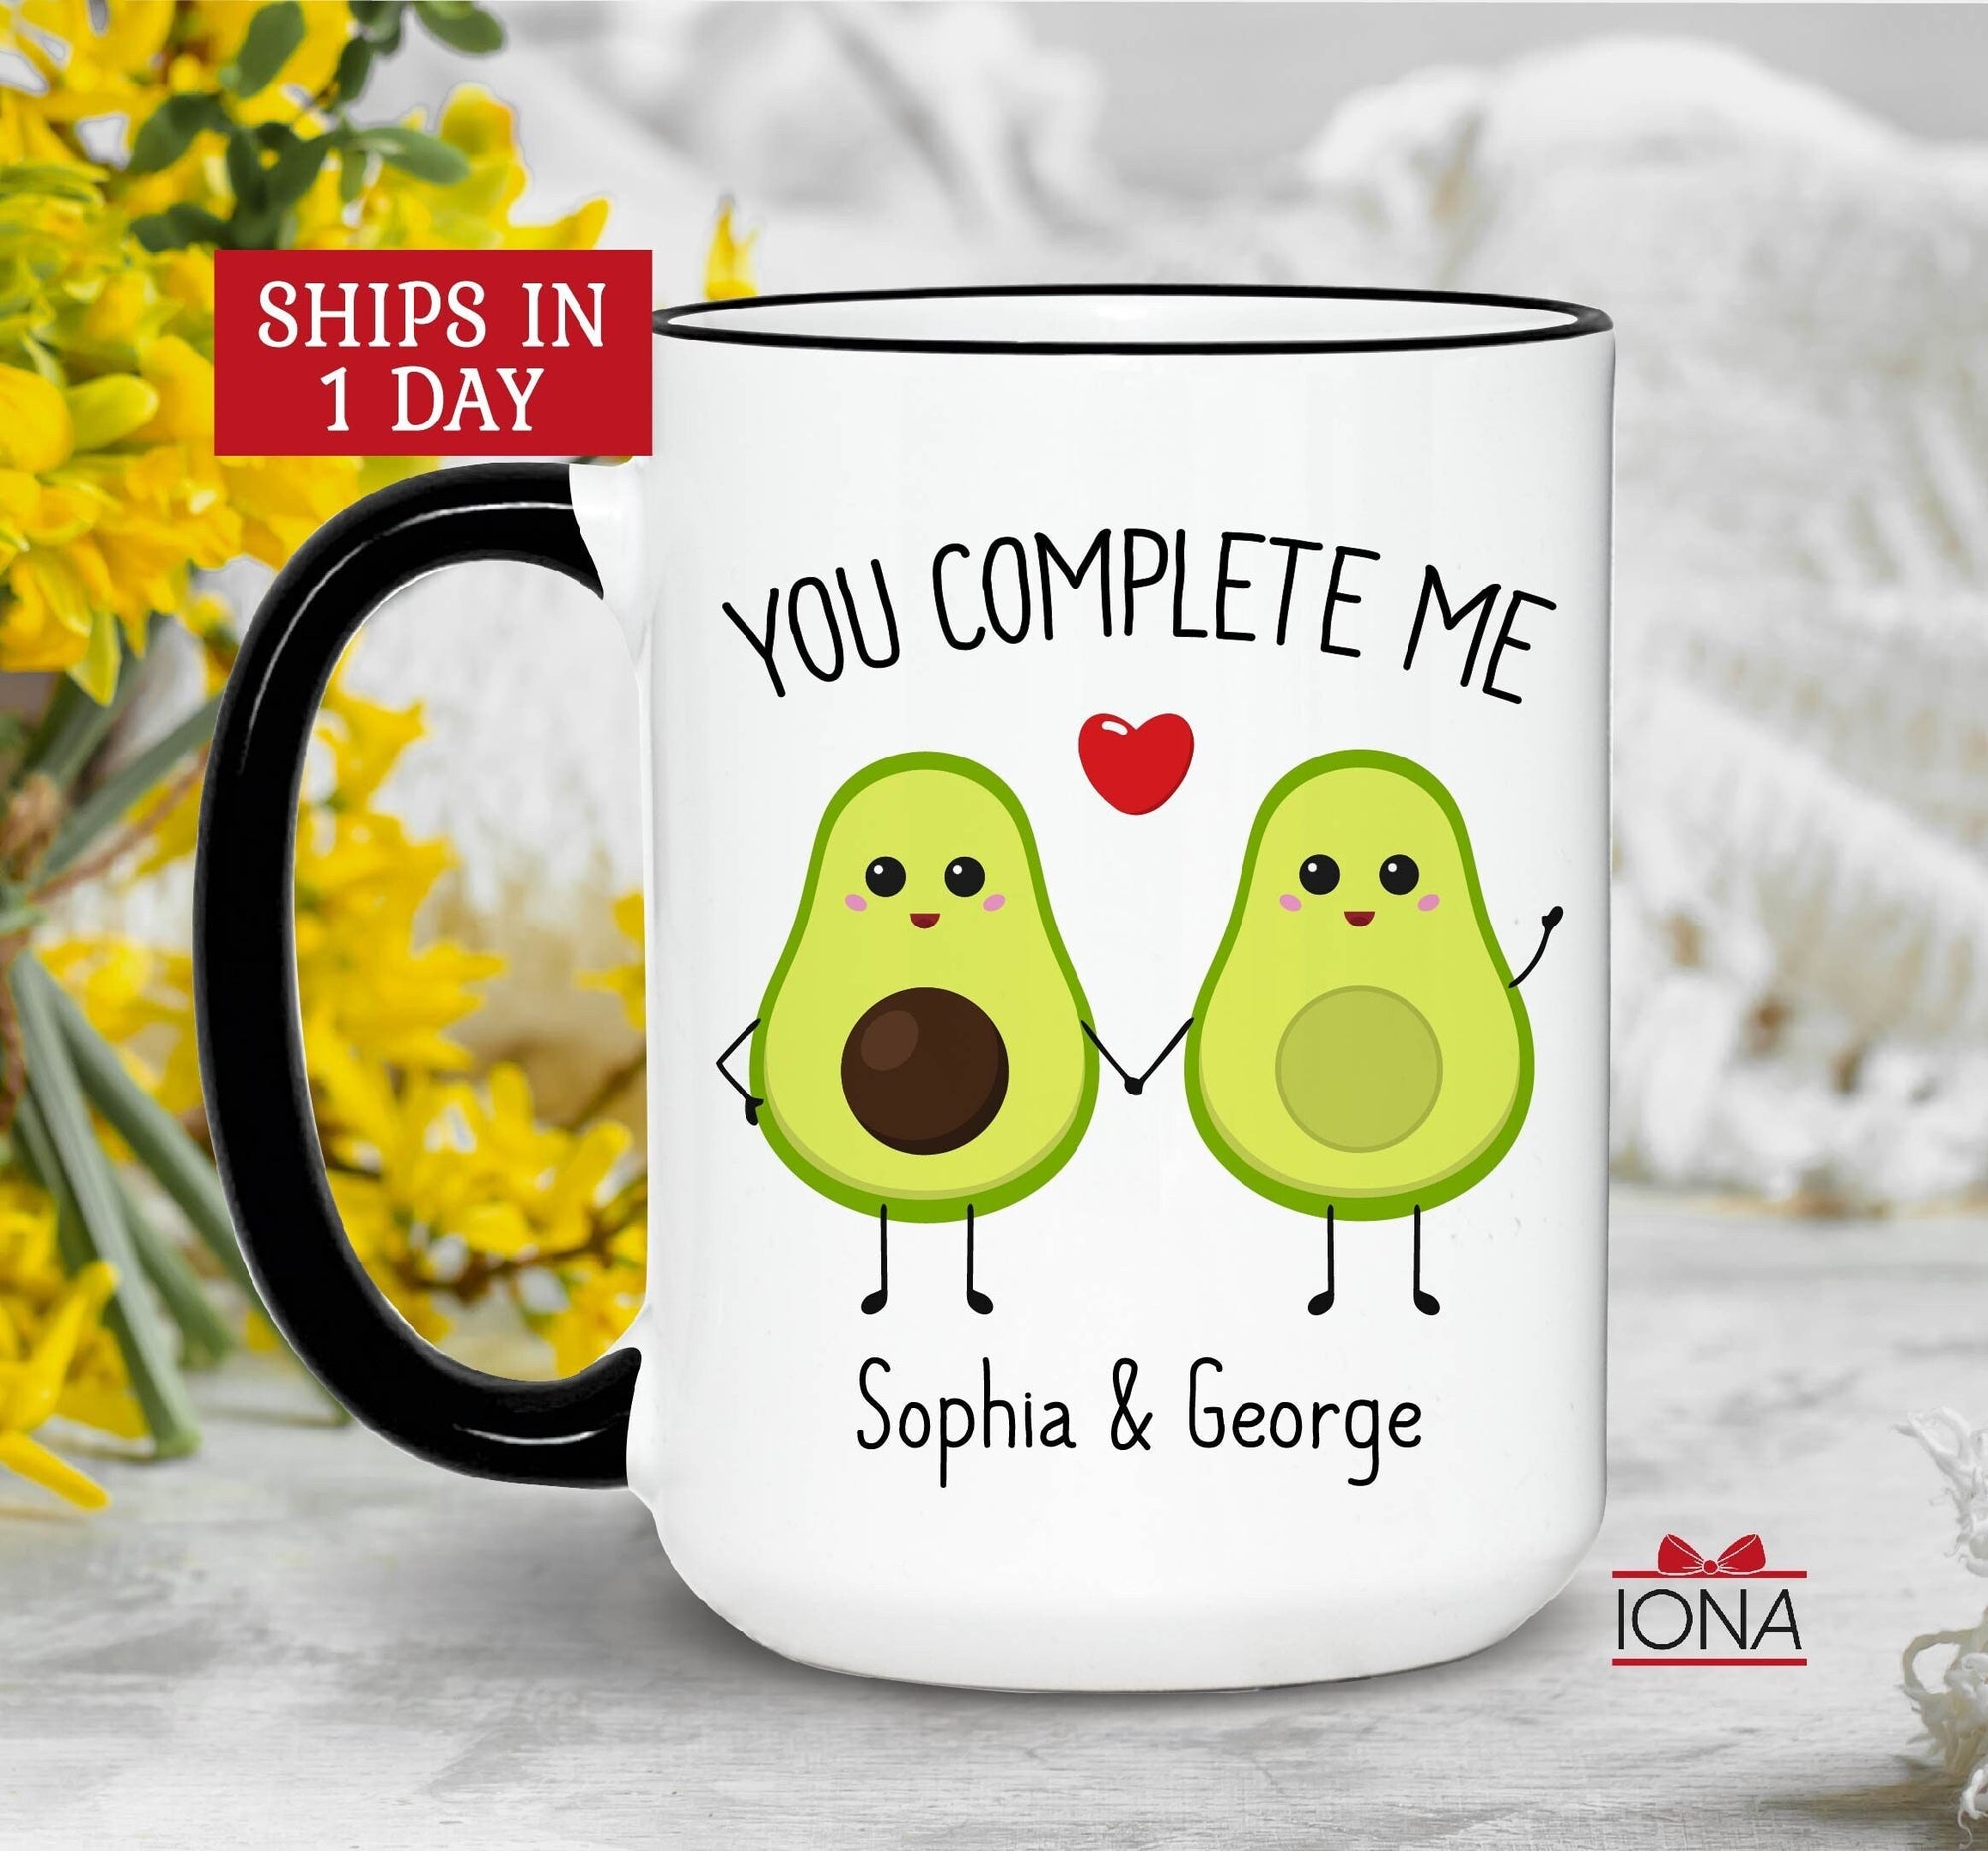 Personalized Valentines Day Couple Mug, Boyfriend Girlfriend Gifts, Romantic Gifts for Her, Custom Couple anniversary idea, You complete me